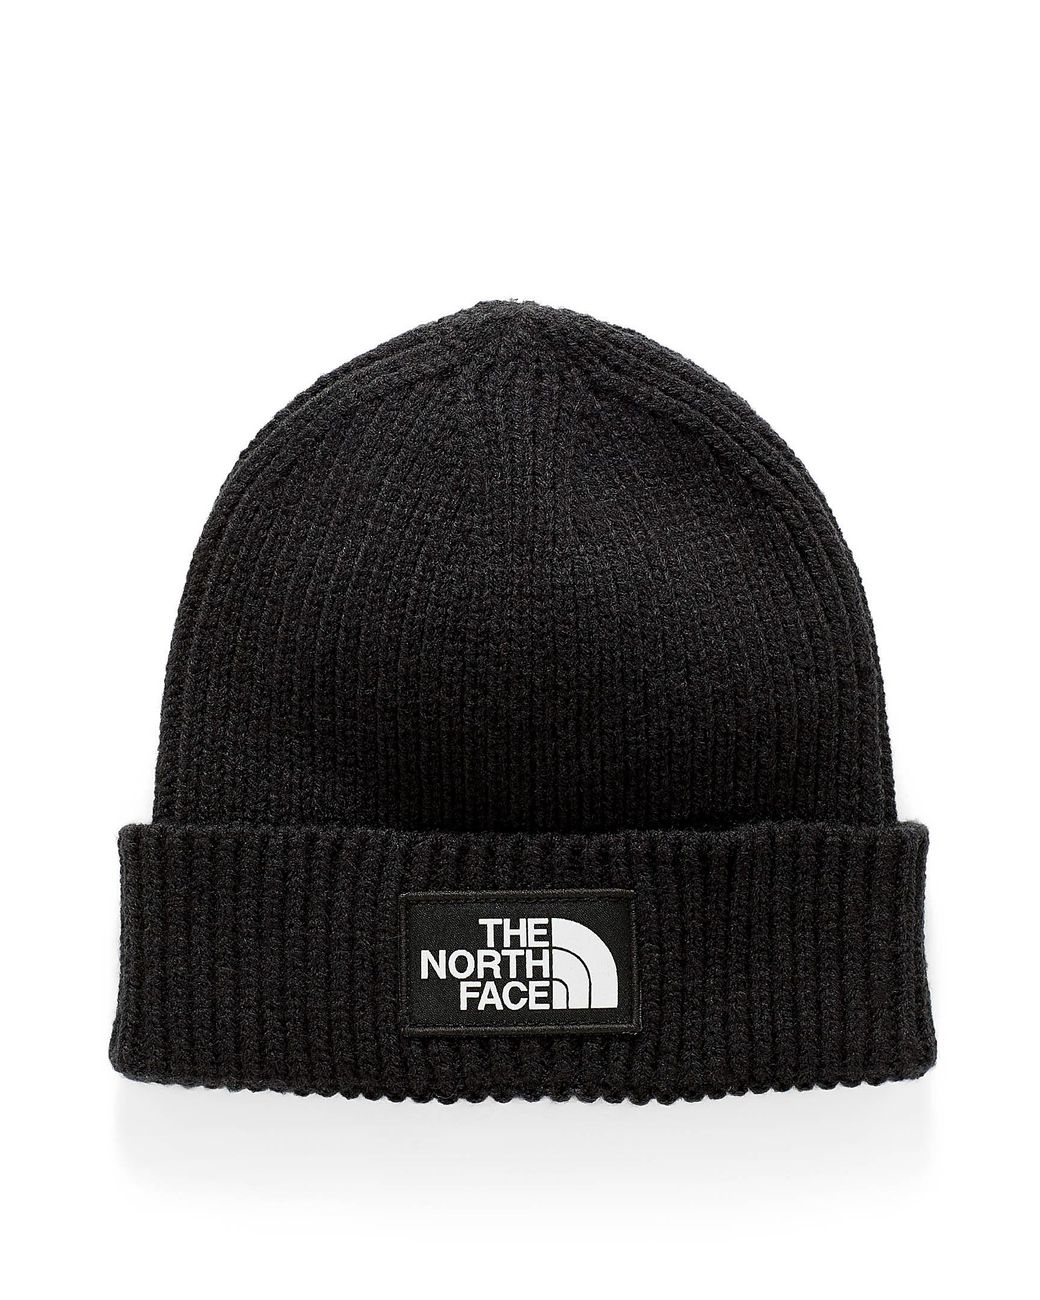 The North Face Synthetic Ribbed Knit Logo Tuque in Black - Lyst